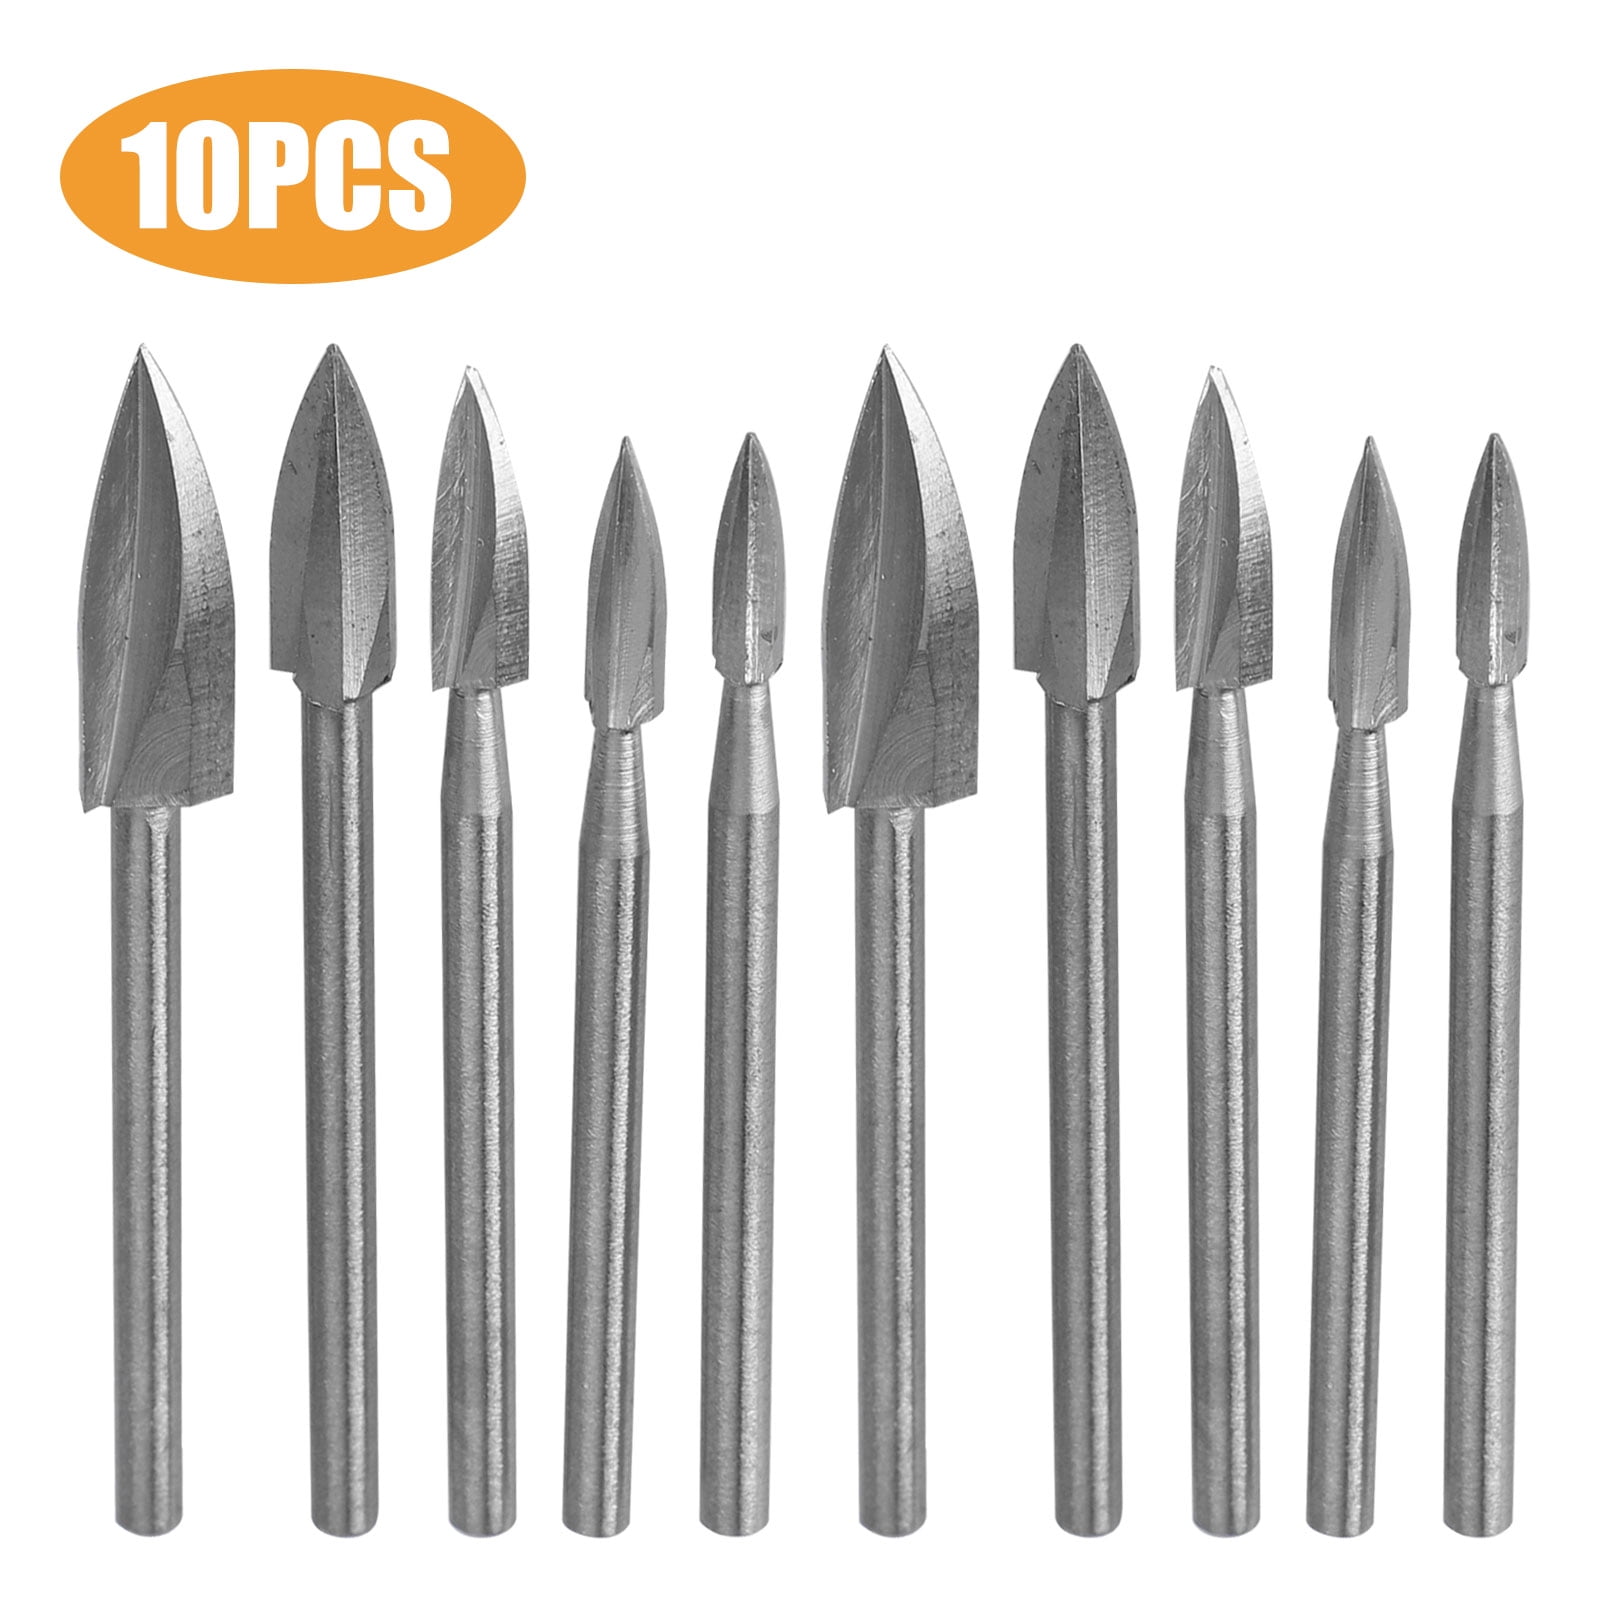 Durable Carbide Engraving Bit Sharp High Hardness Concrete Engraving Bit for CNC Router Woodworking Carpenter Carving Tool 